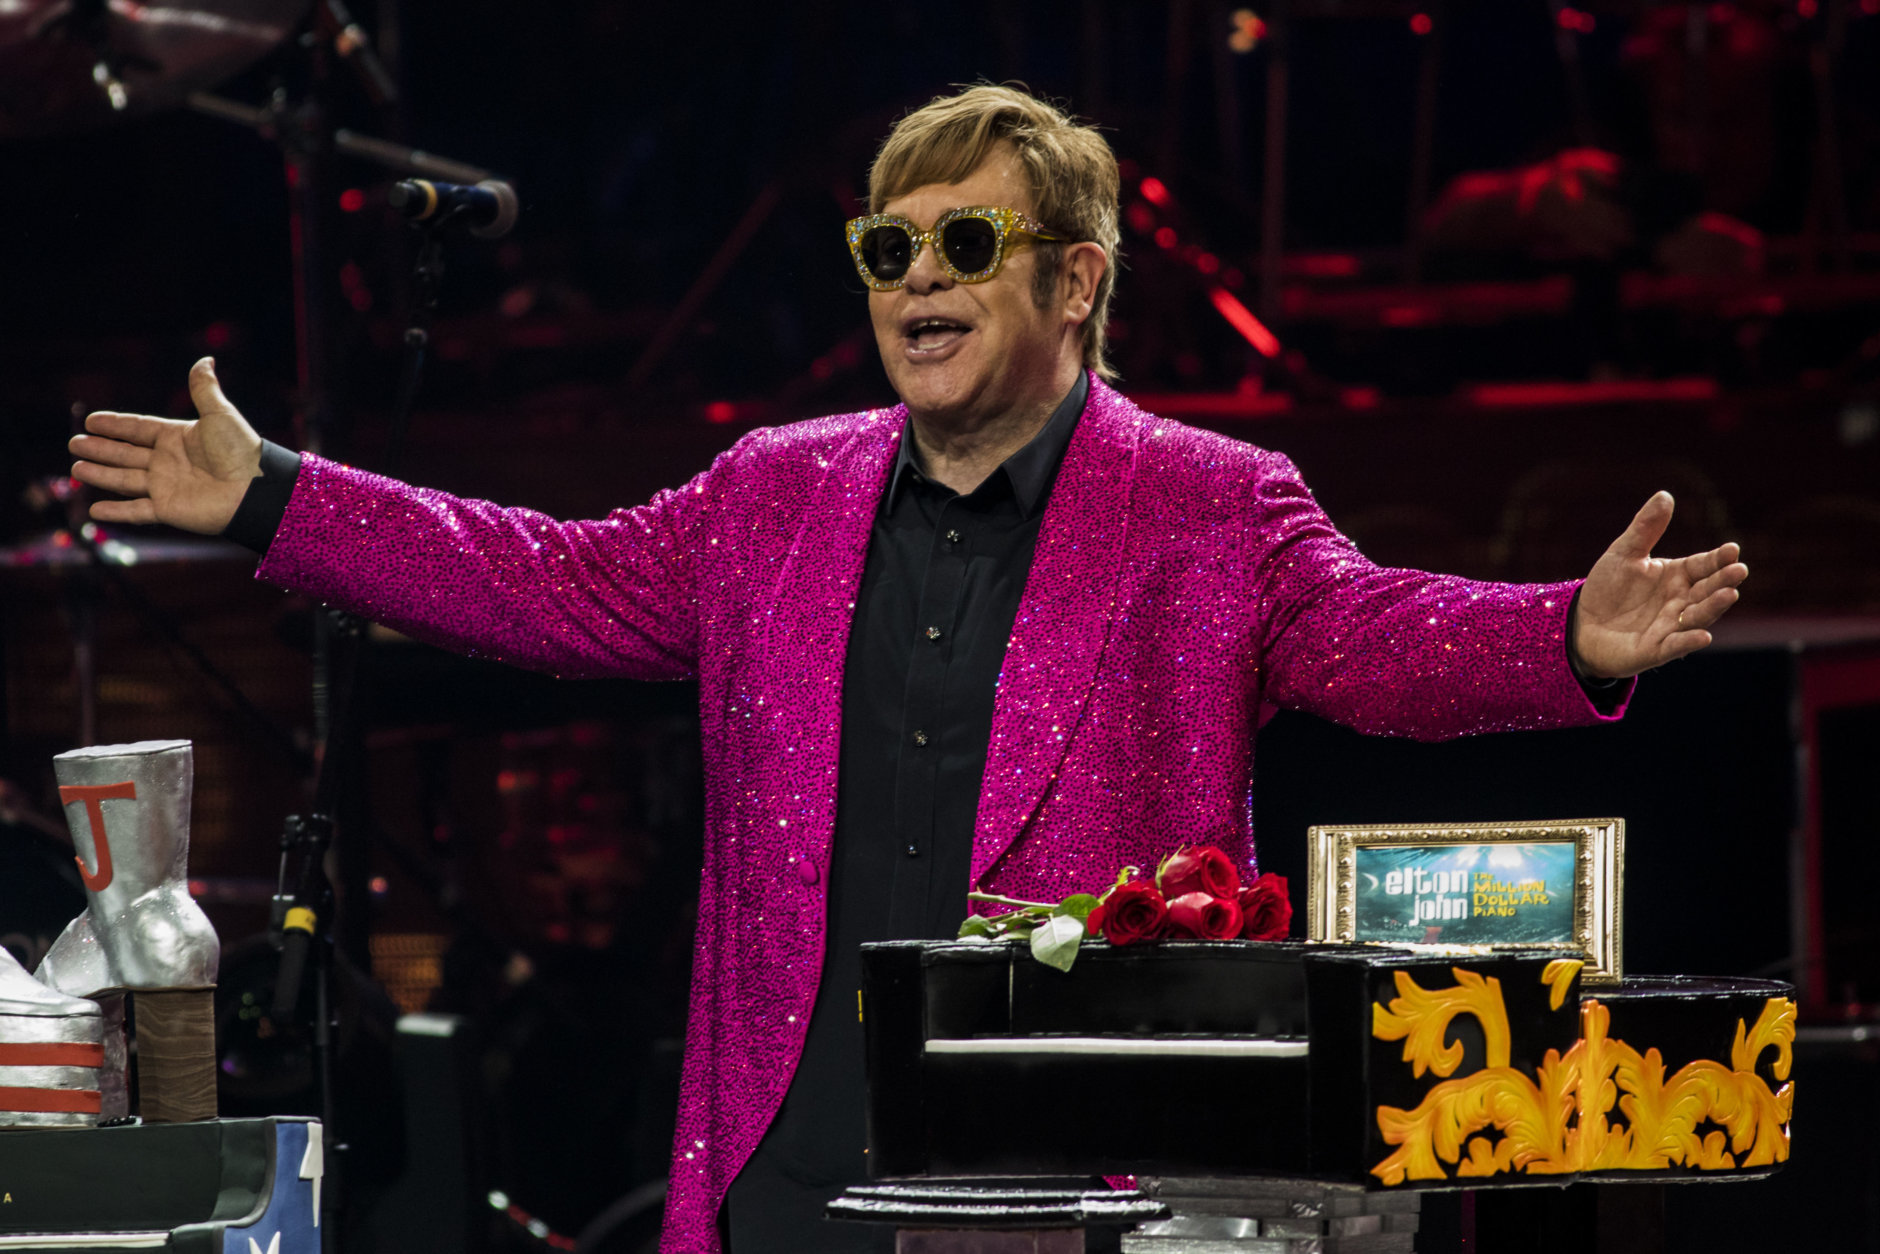 Elton John takes the stage during his final performance of "The Million Dollar Piano" at The Colosseum at Caesars Palace on Thursday, May 17, 2018, in Las Vegas. (Photo by Joe Buglewicz/Invision/AP)